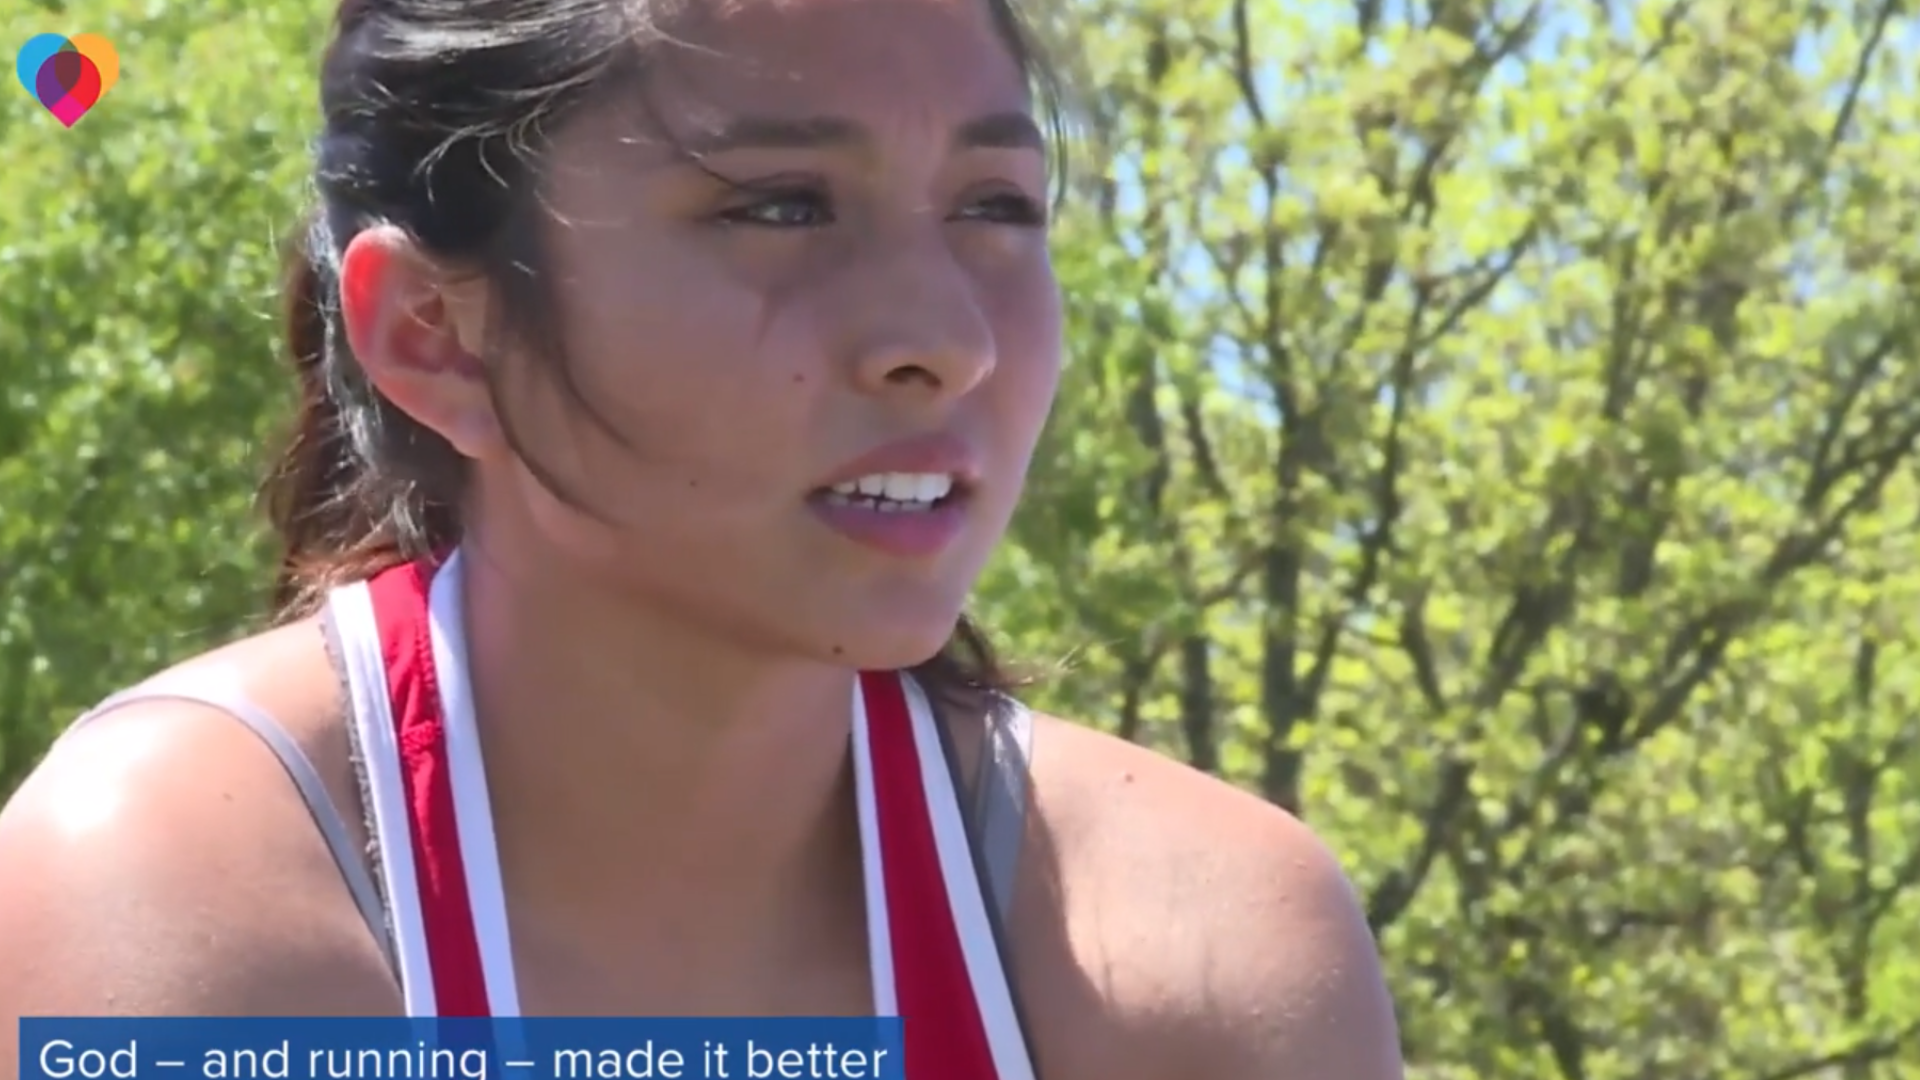 A high school athlete from Arkansas is proving that strength comes in more than one form. Not only has Anya Sifuentes pushed herself as a track star, she also pushed herself to overcome a major life obstacle: homelessness.